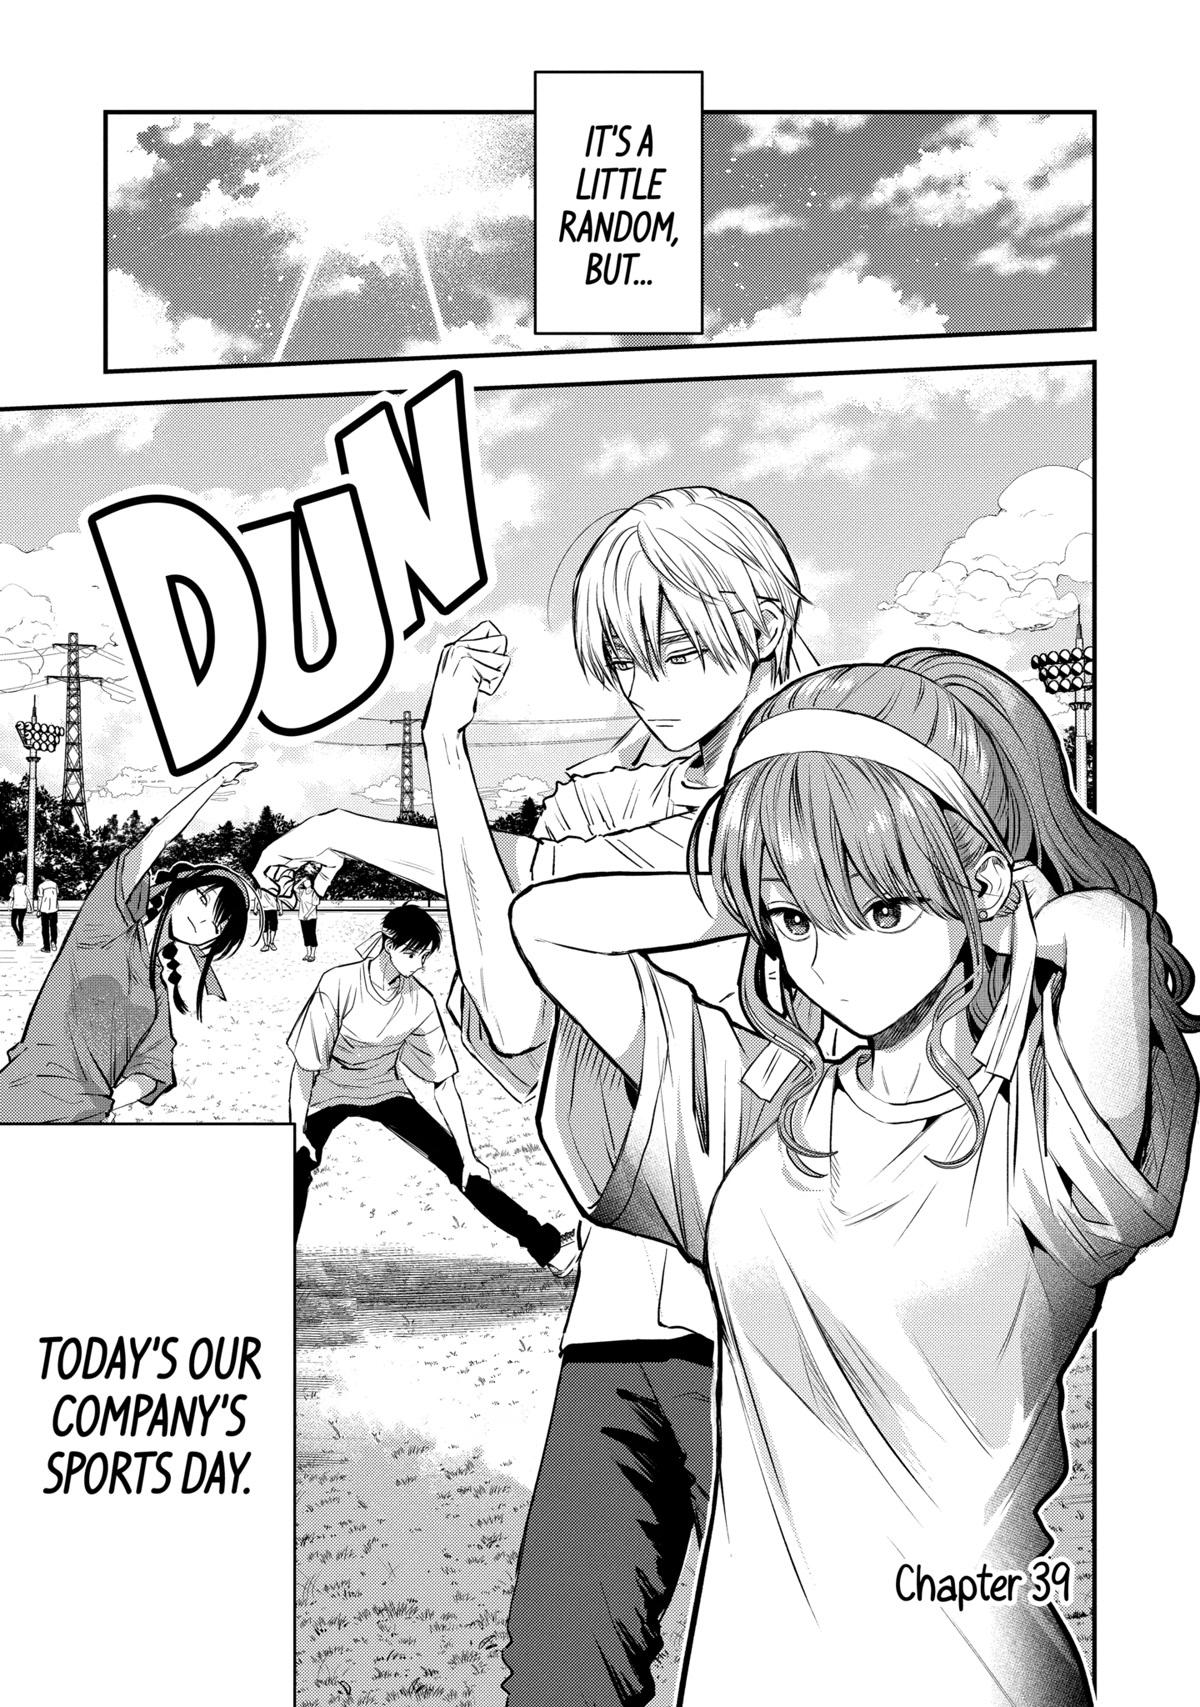 The Quintessential Quintuplets, Chapter 39 - The Quintessential Quintuplets  Manga Online